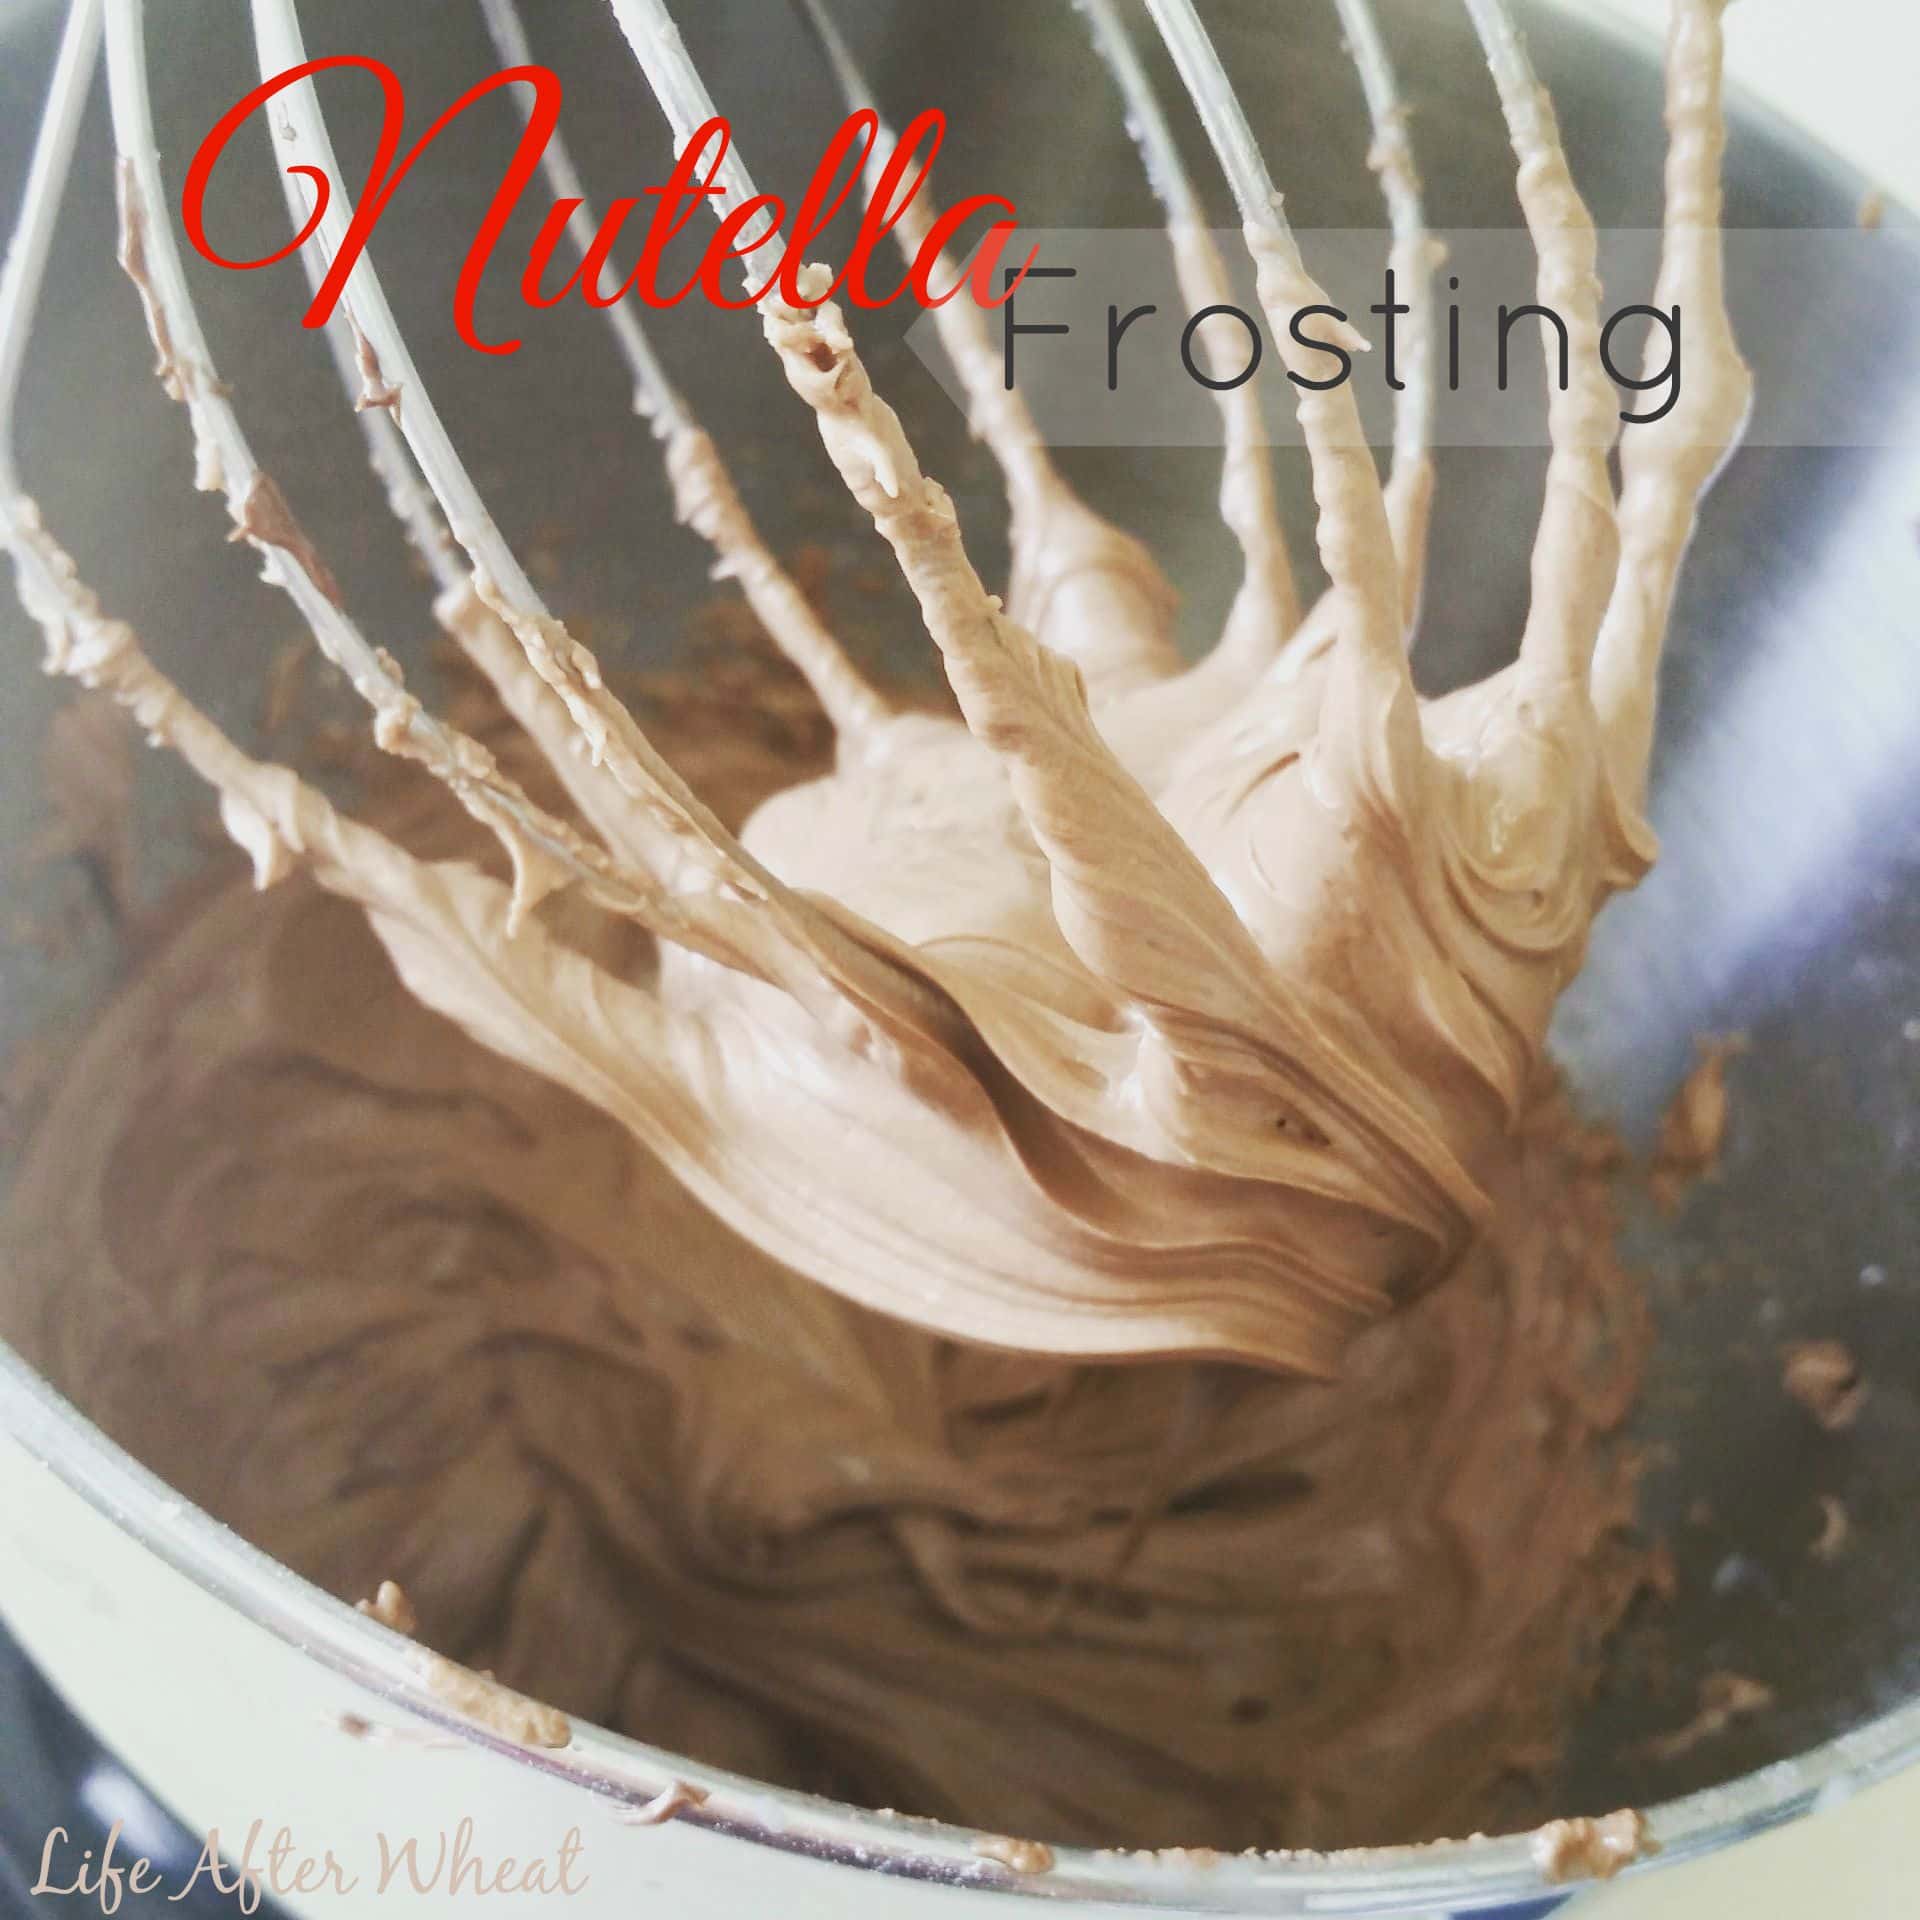 Nutella Frosting is an easy and decadent frosting that will take your cupcakes or cake to the next level!